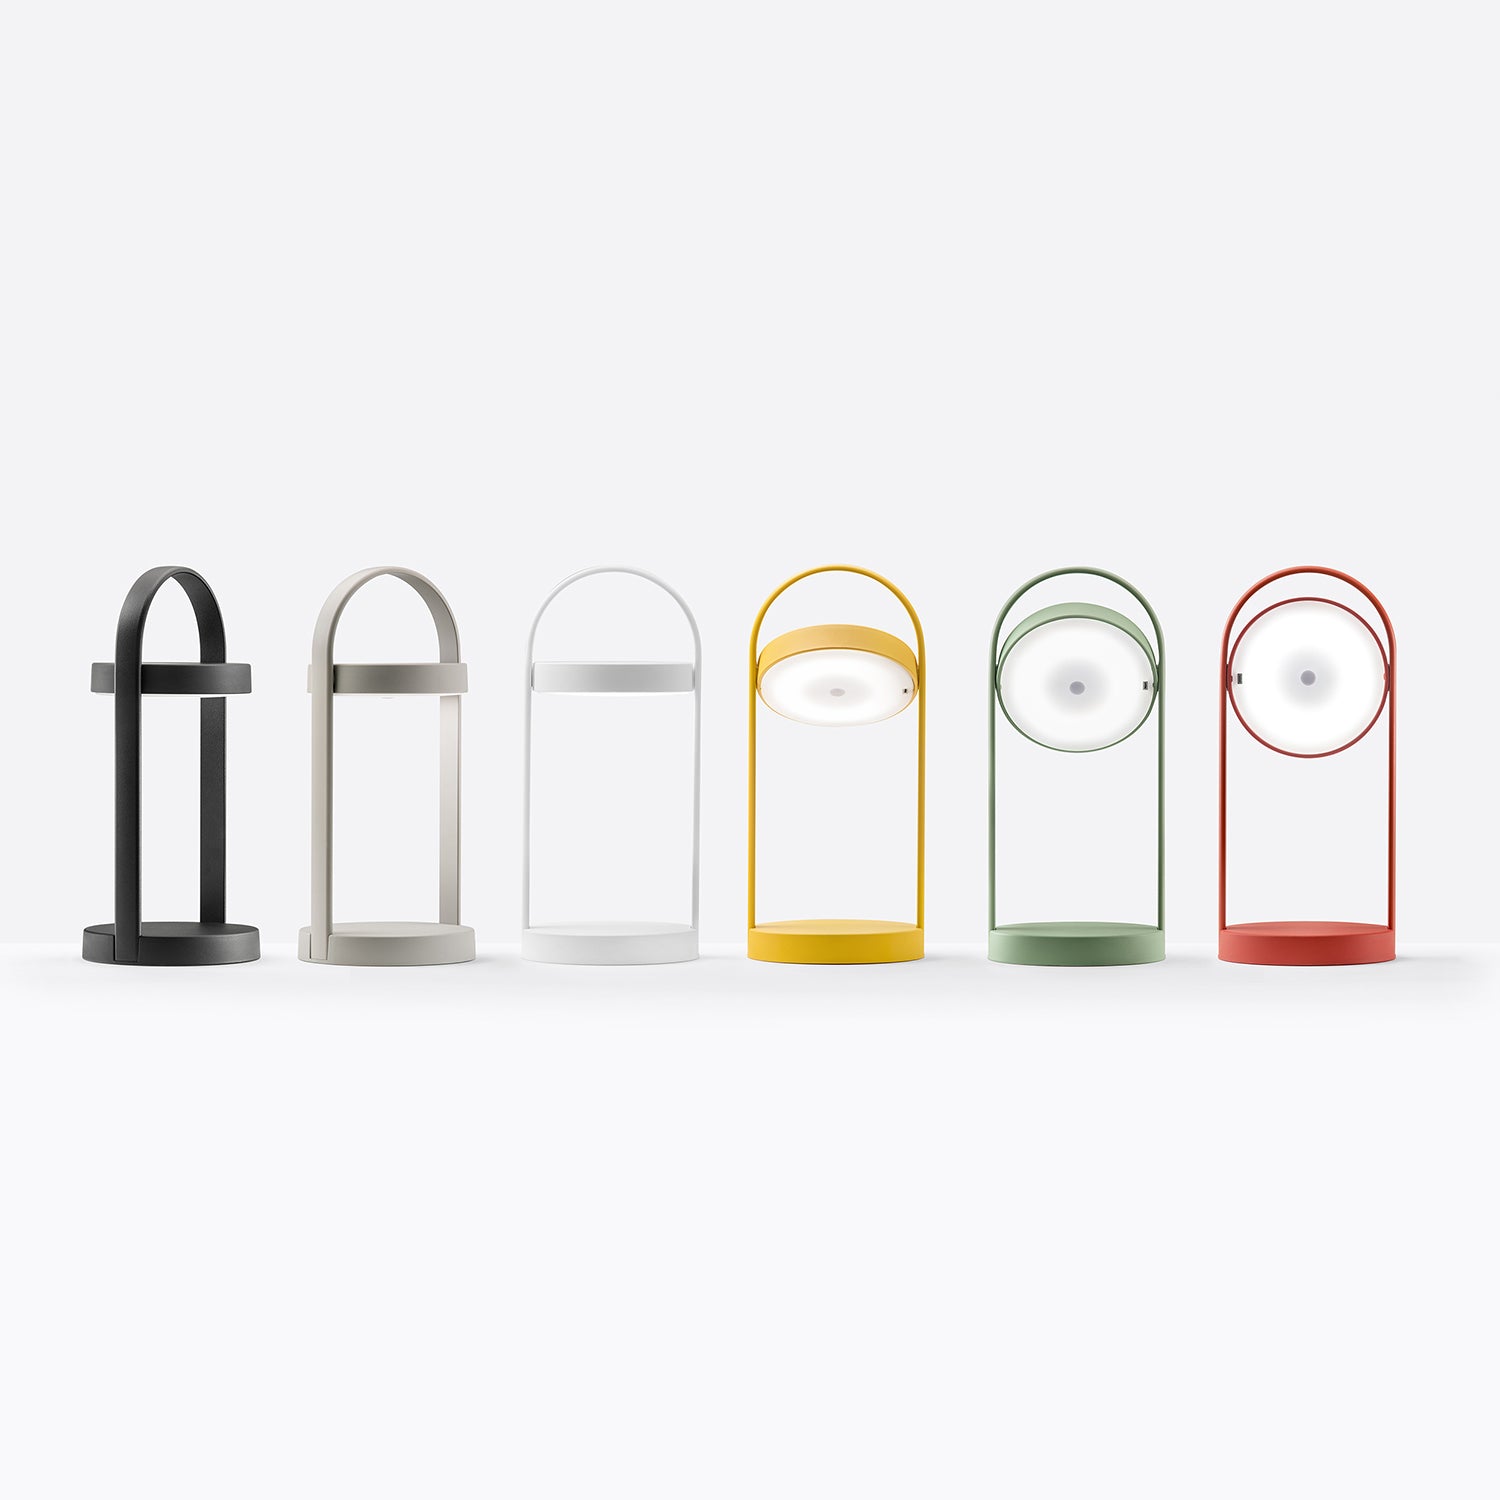 Pedrali 33 portable outdoor table lamps in all colours